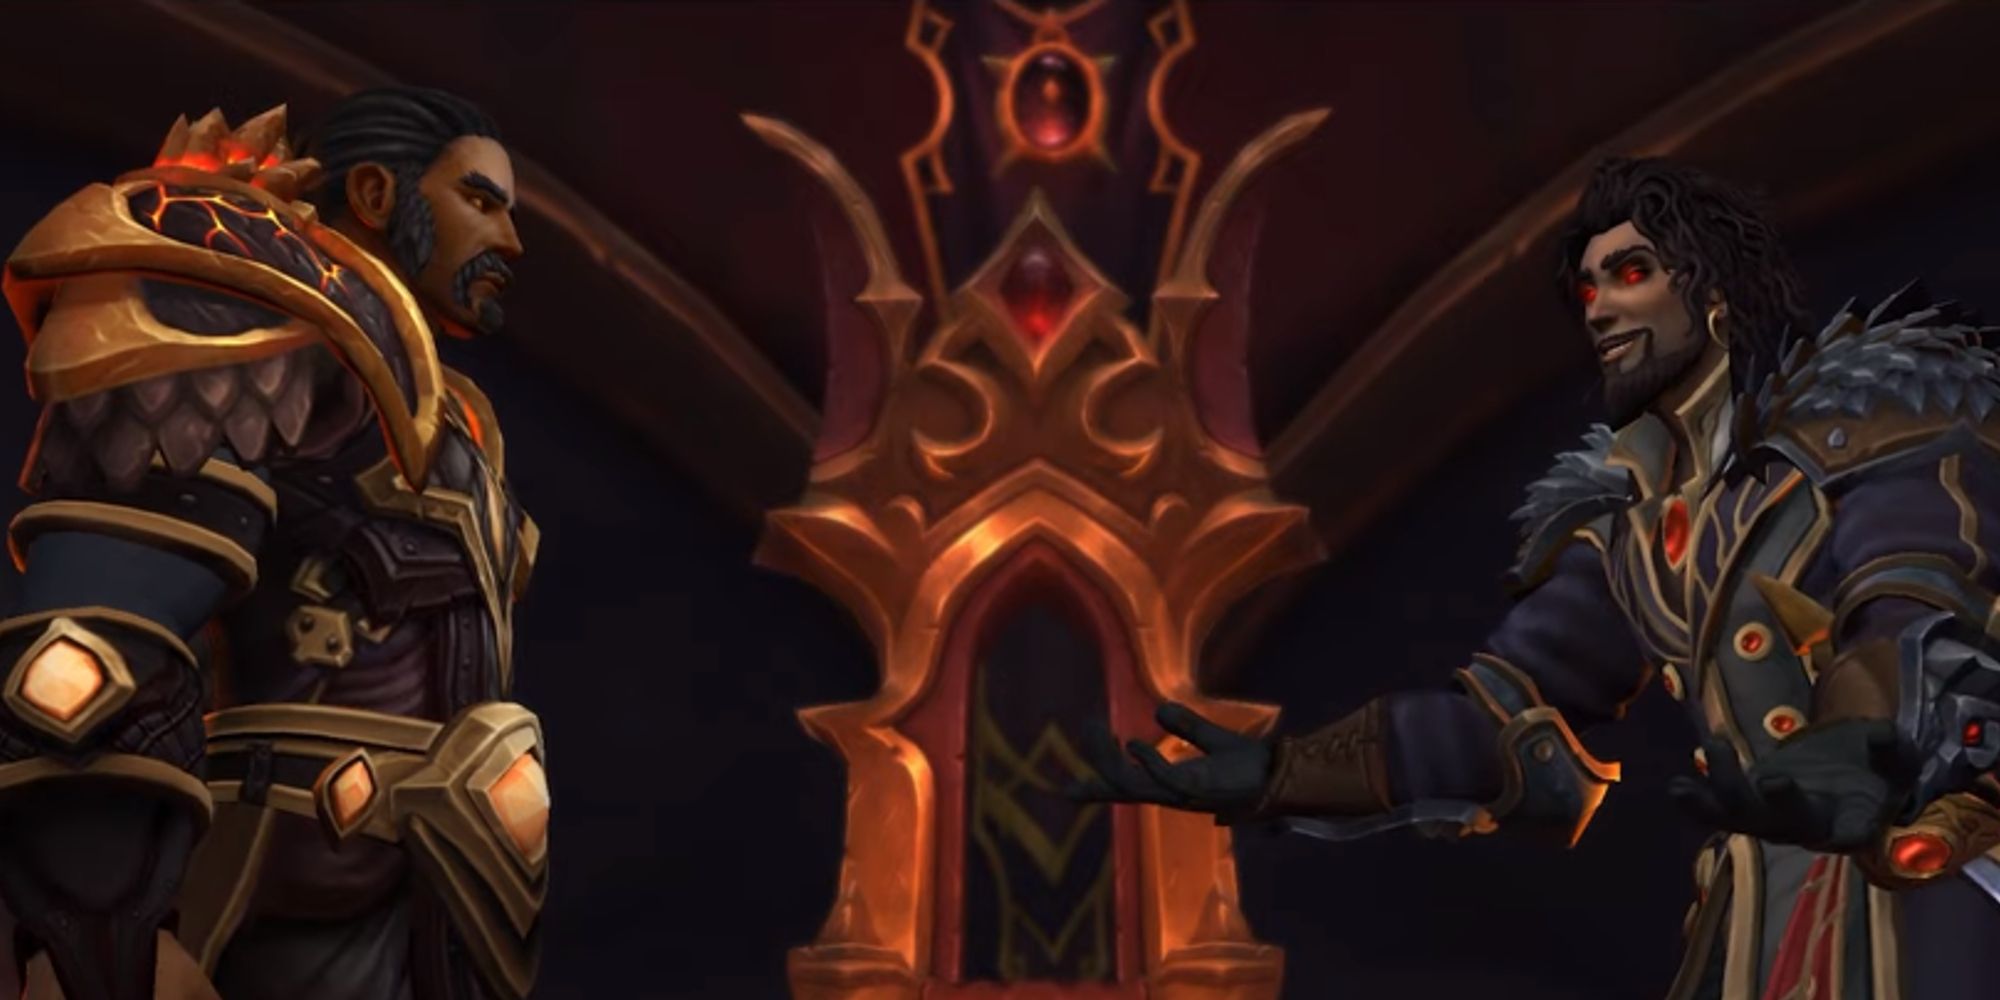 Wrathion and Sabellian argue over leadership over the Dragon Isles in World of Warcraft Dragonflight